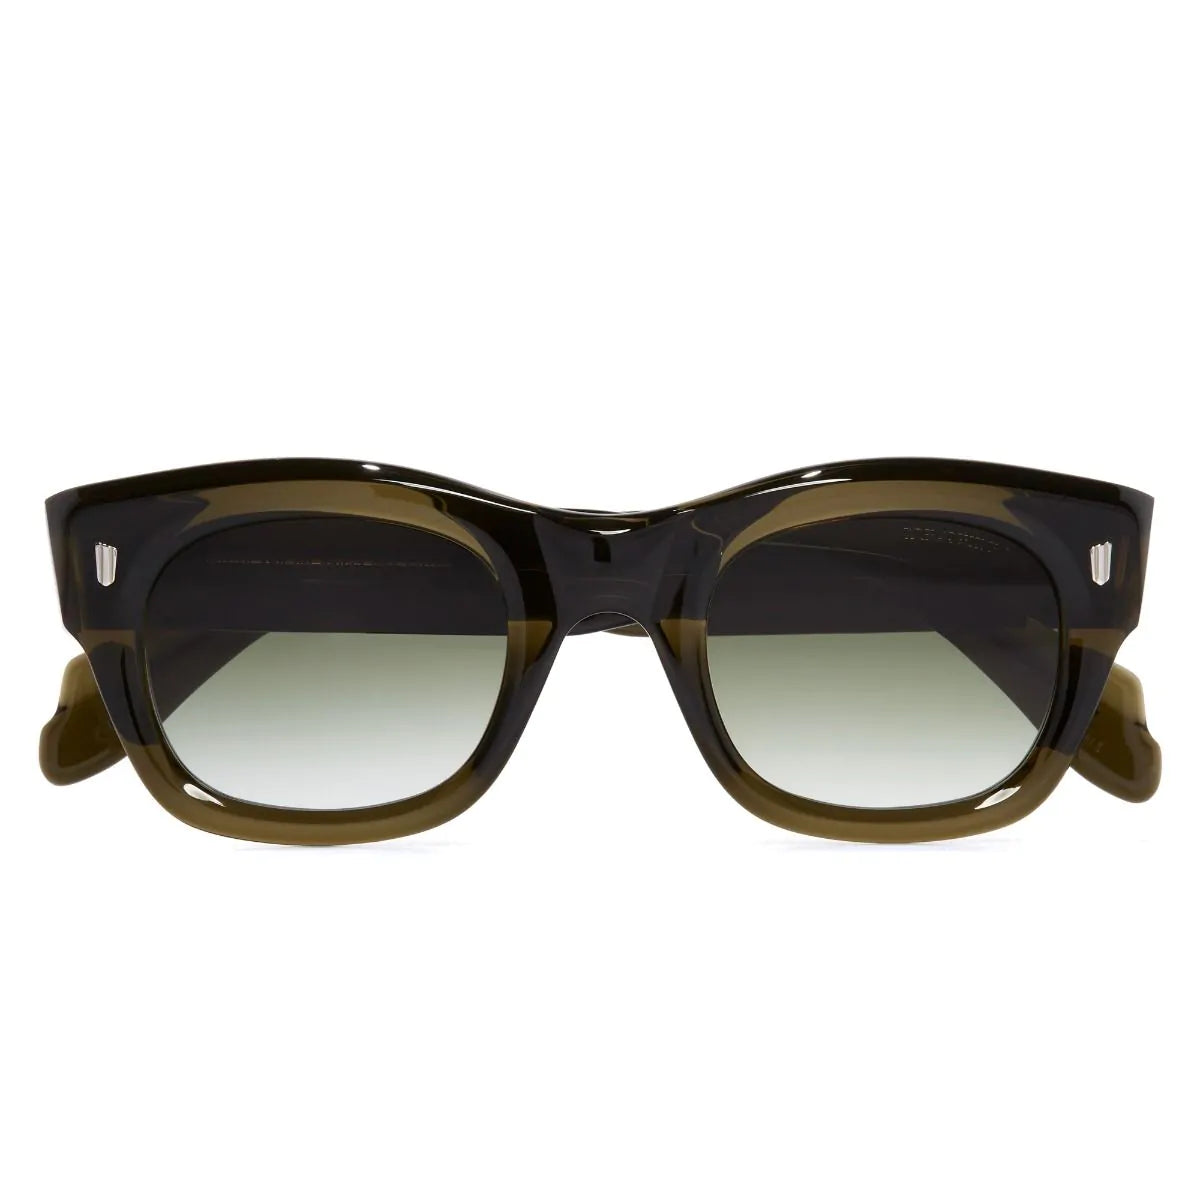 9261 Cat Eye Sunglasses - Olive by Cutler and Gross